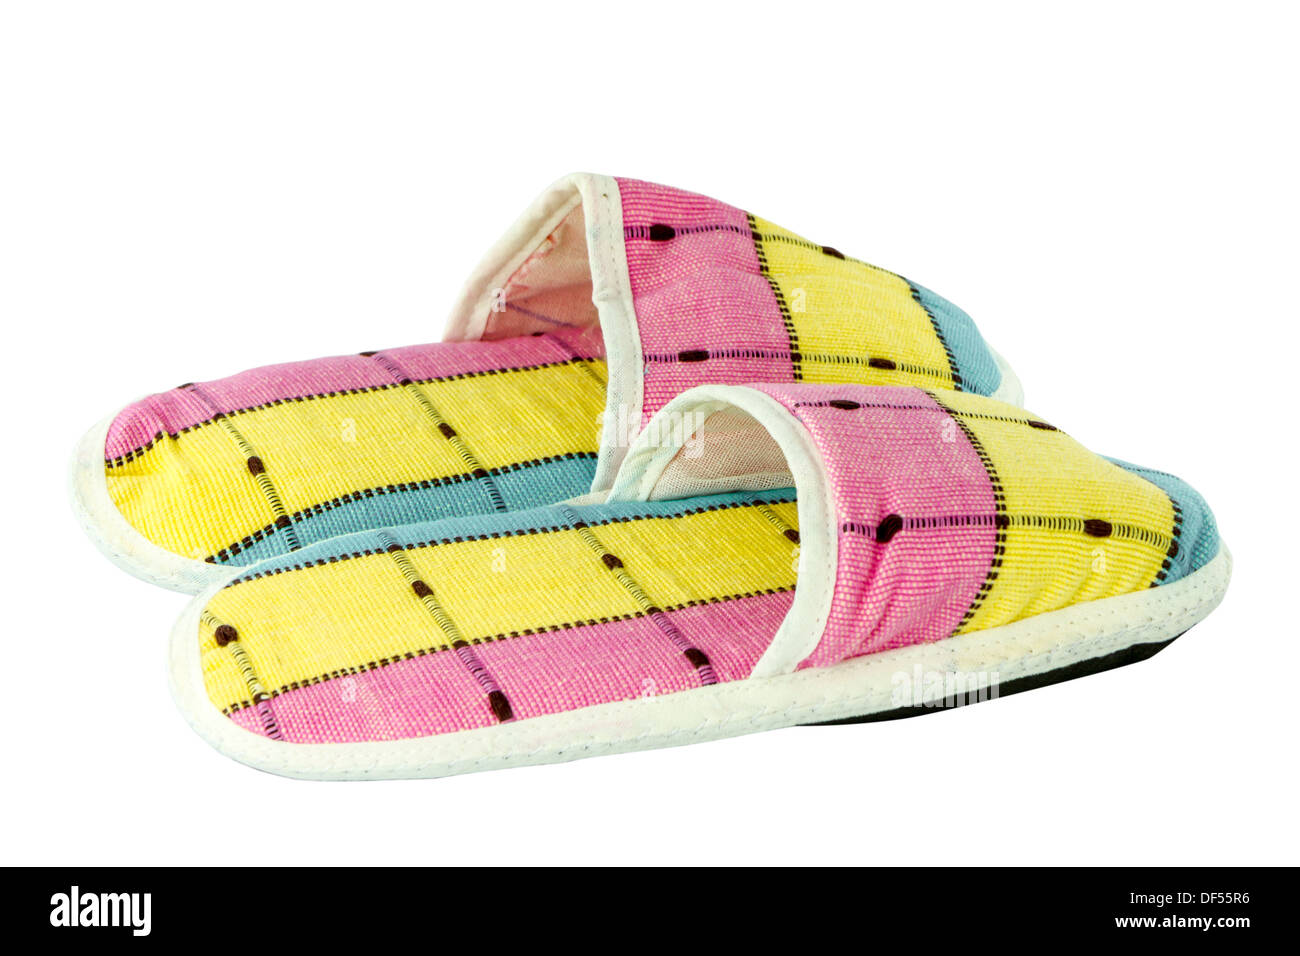 Colorful slippers isolate on white background Stock Photo - Alamy